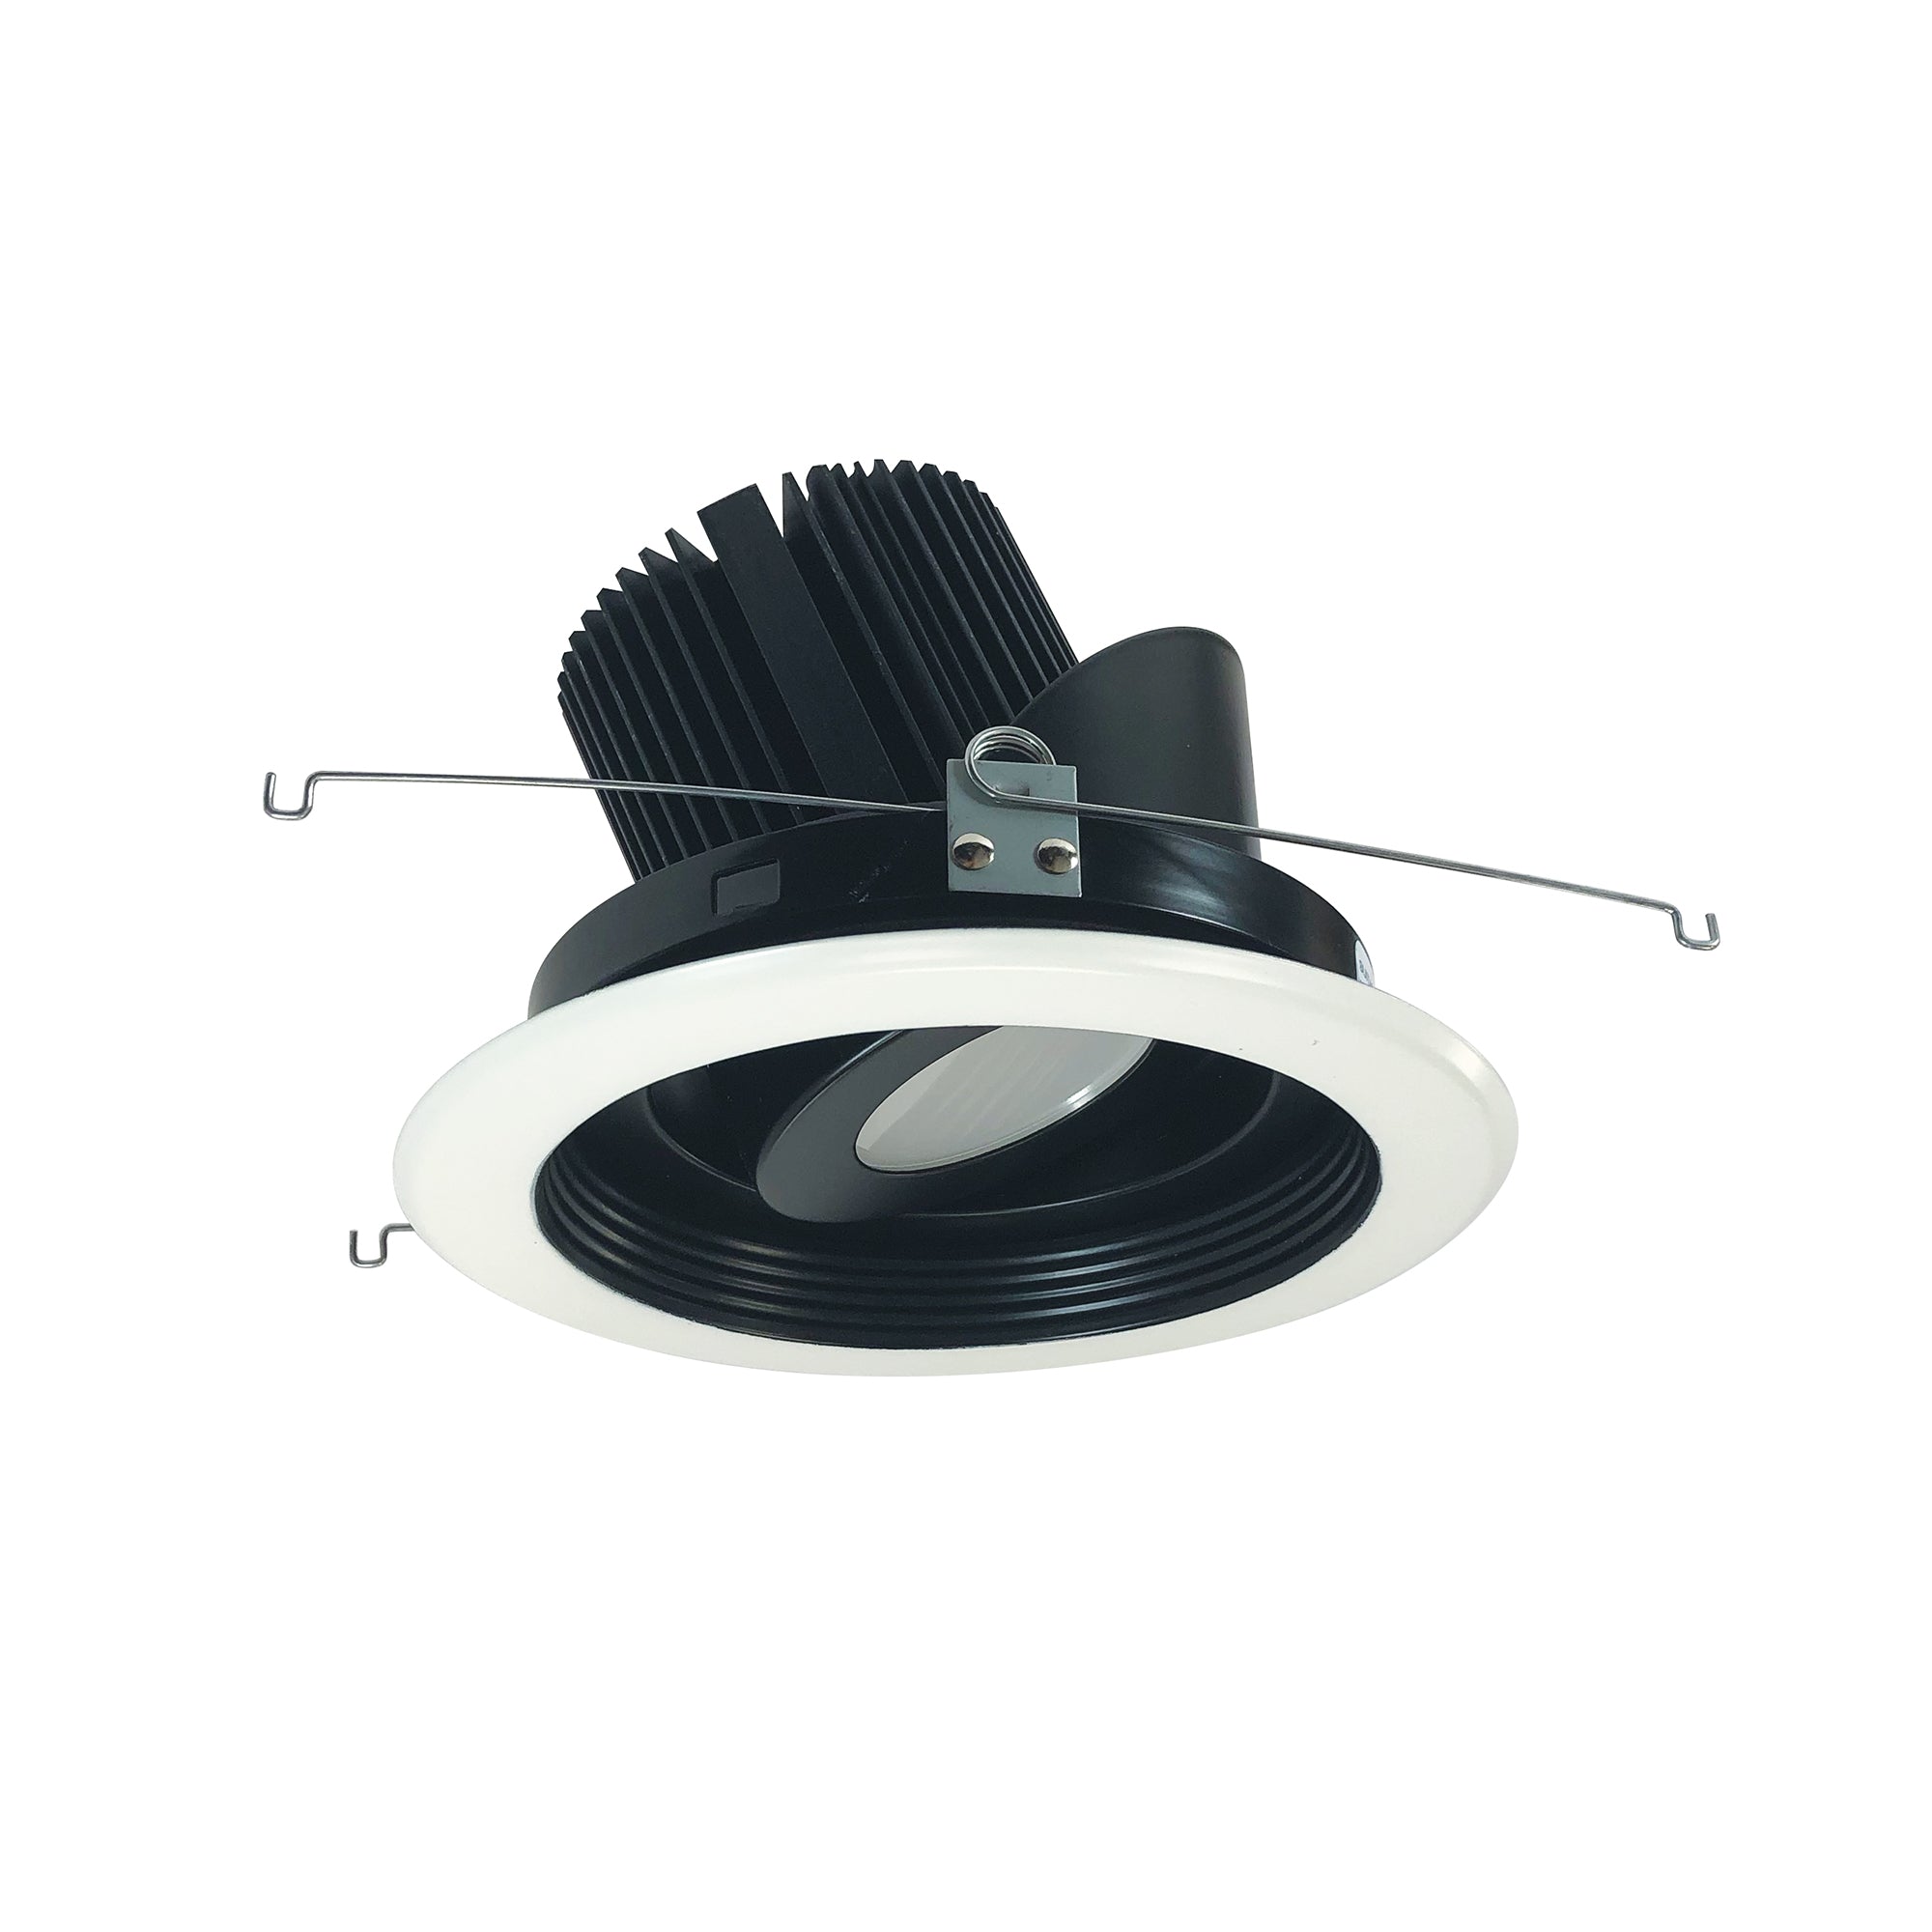 Nora Lighting NRM2-617L2530FBW - Recessed - 6 Inch Marquise II Round Regressed Adj. Baffle, Flood, 2500lm, 3000K, Black/White (Not Compatible with NHRM2-625 Housings)